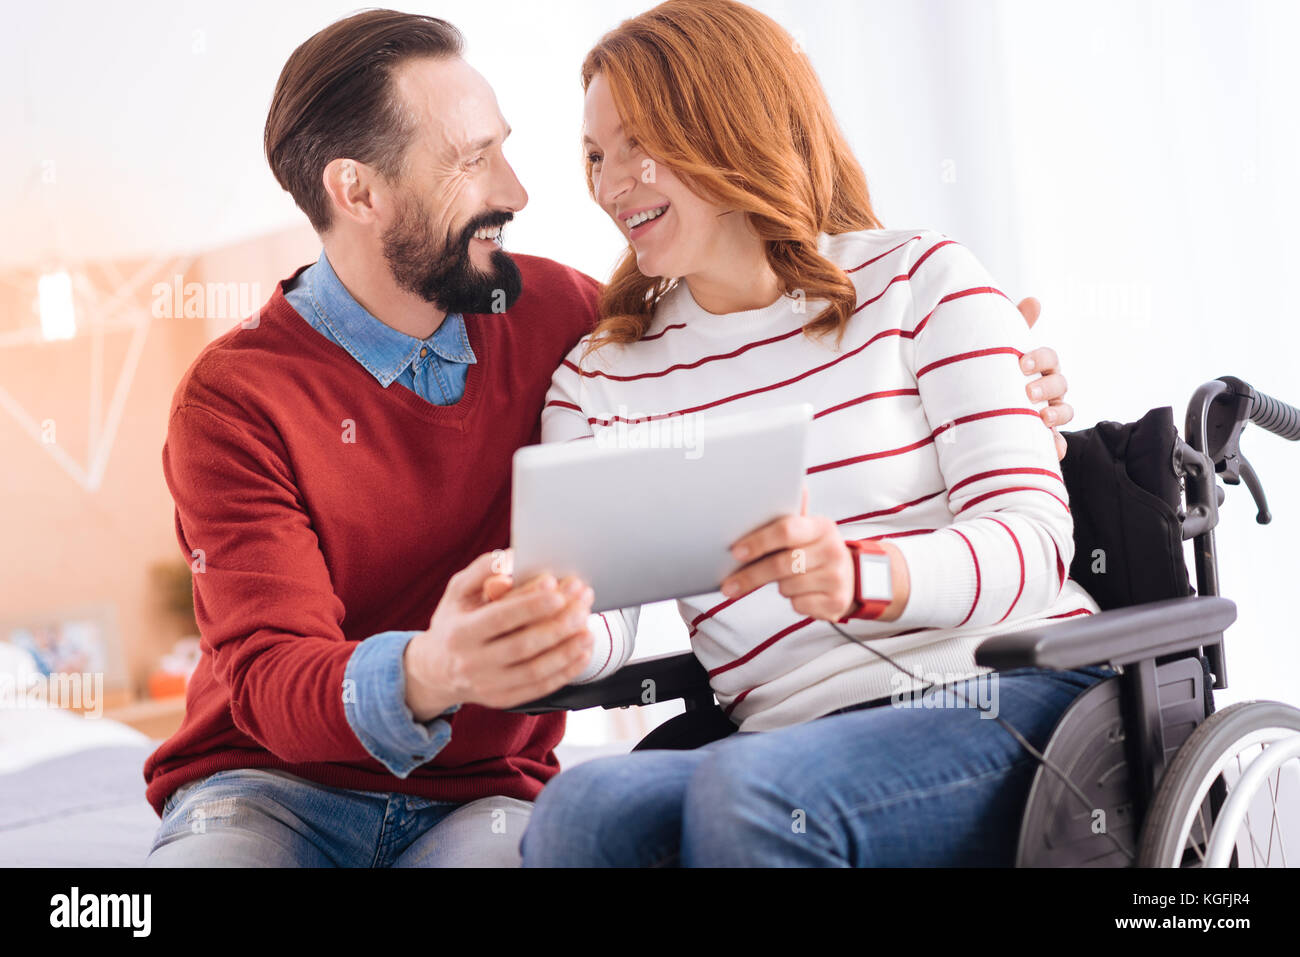 Content woman and man laughing and relaxing Stock Photo